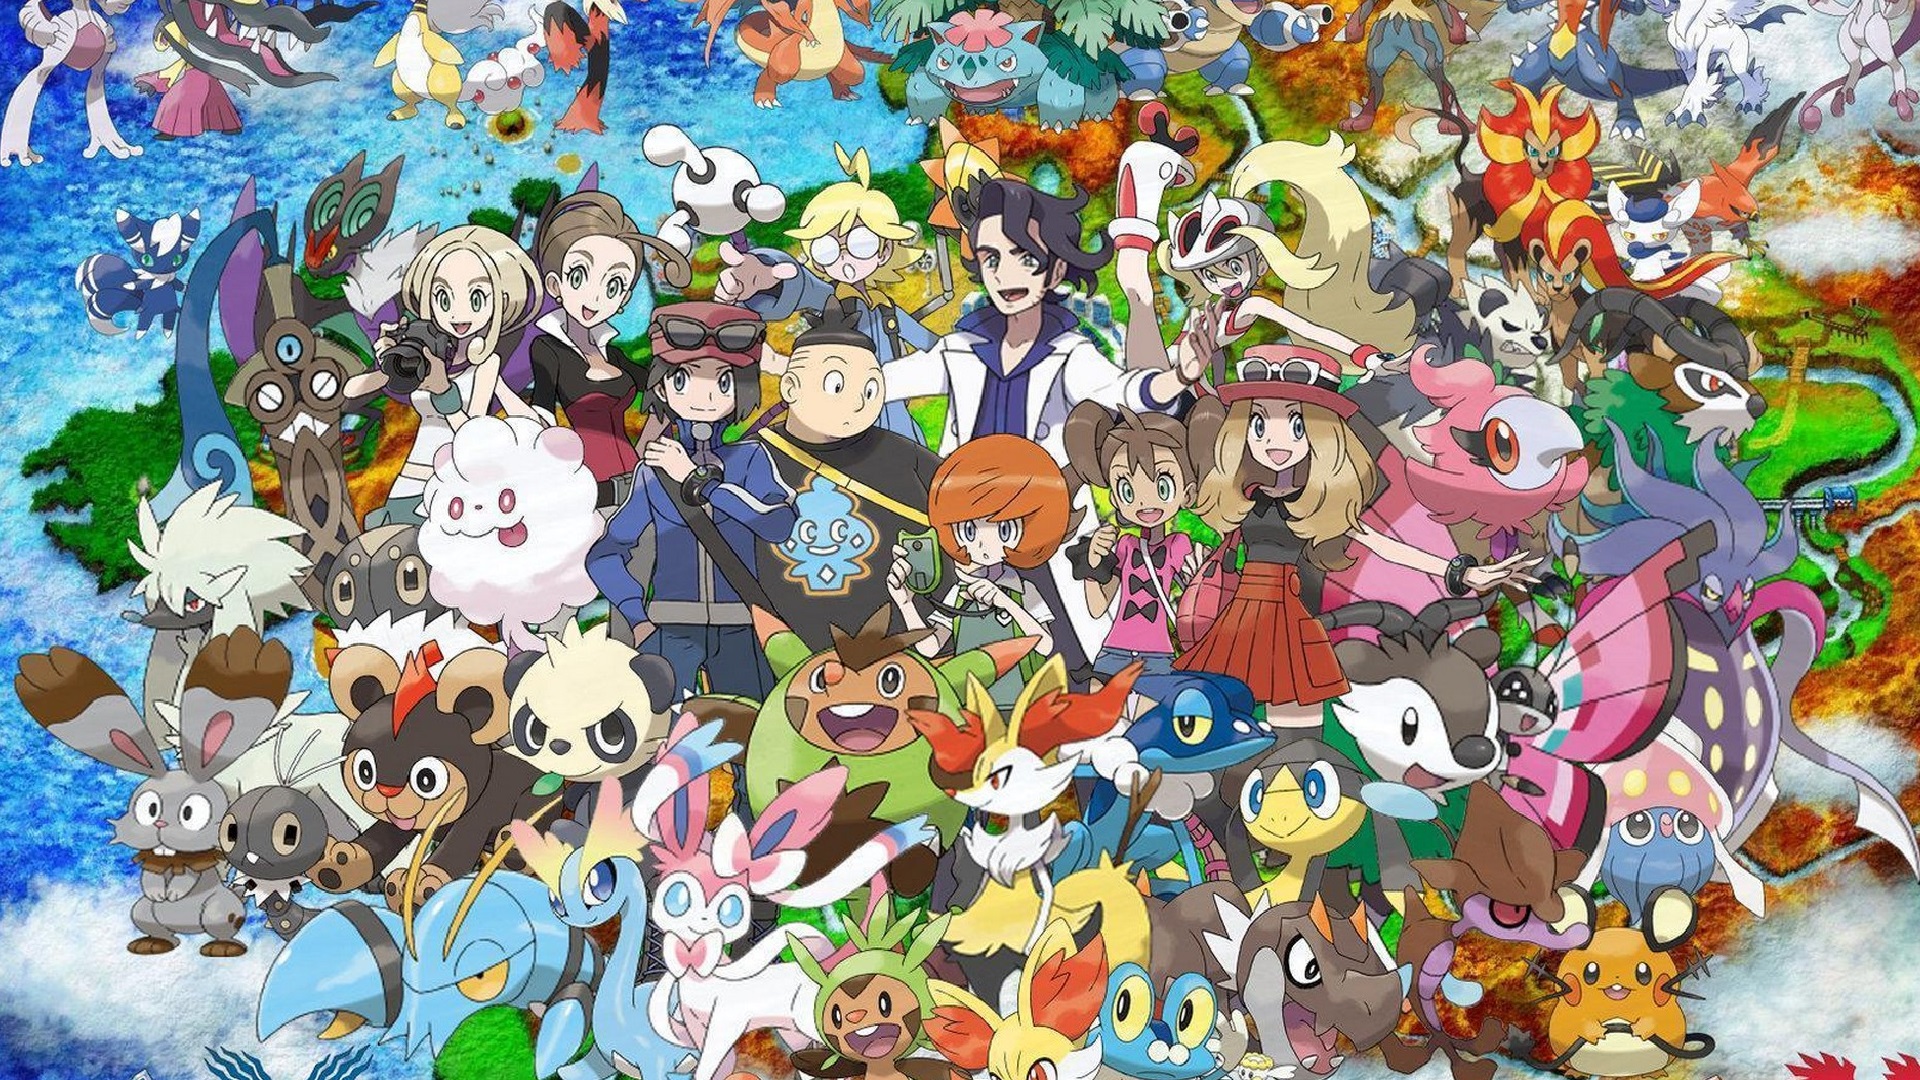 Best Pokemon Wallpaper HD with high-resolution 1920x1080 pixel. You can use this wallpaper for your Desktop Computer Backgrounds, Mac Wallpapers, Android Lock screen or iPhone Screensavers and another smartphone device